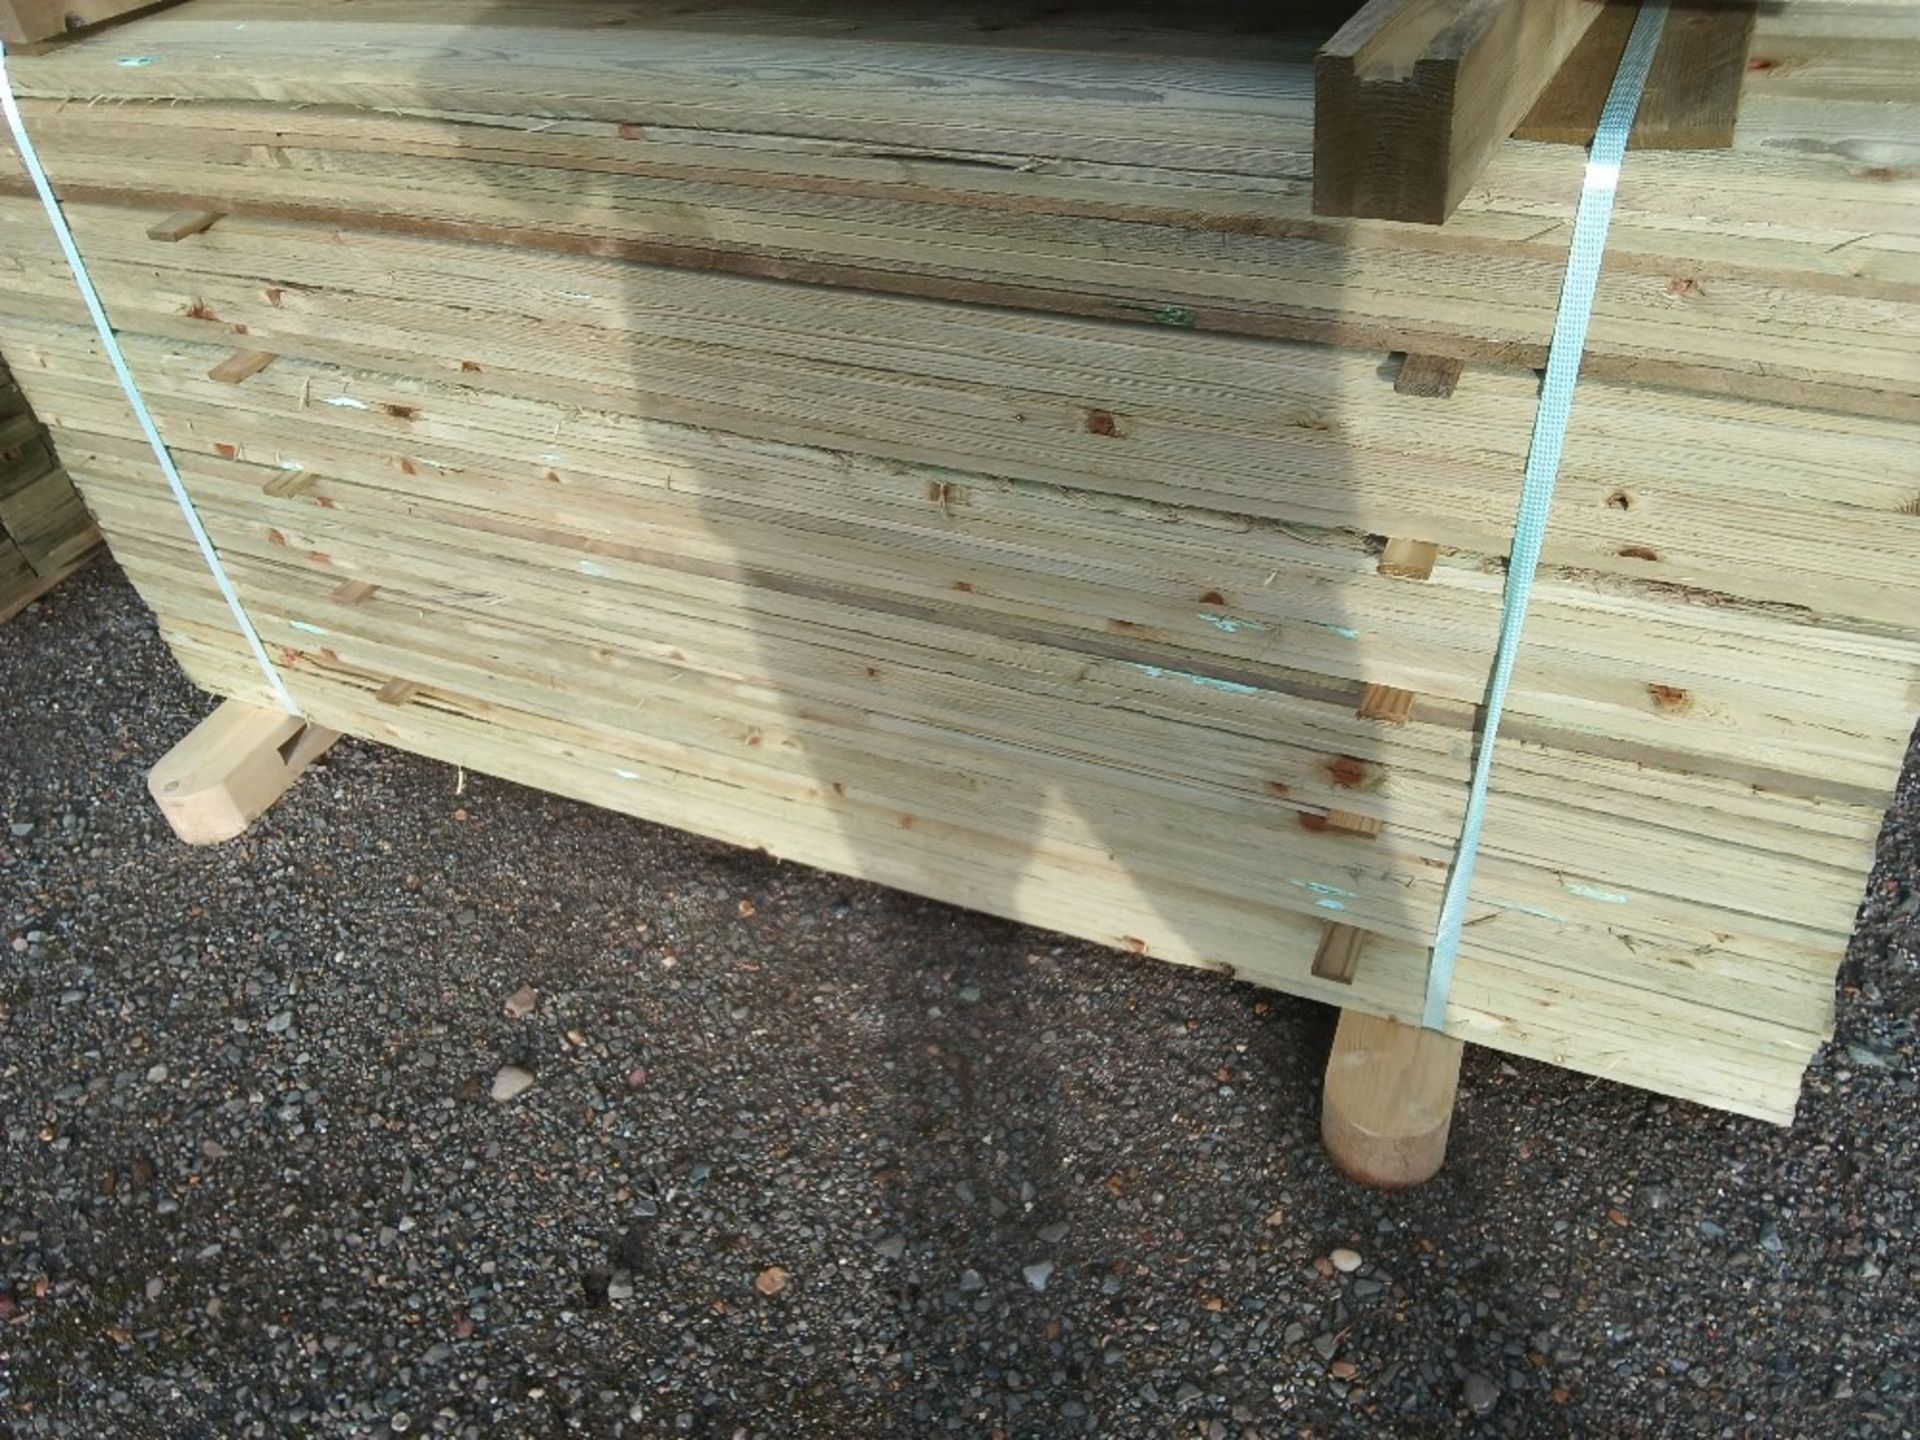 LARGE PACK OF TREATED FEATHER EDGE CLADDING TIMBER BOARDS: 1.65M LENGTH X 100MM WIDTH APPROX. - Image 3 of 3